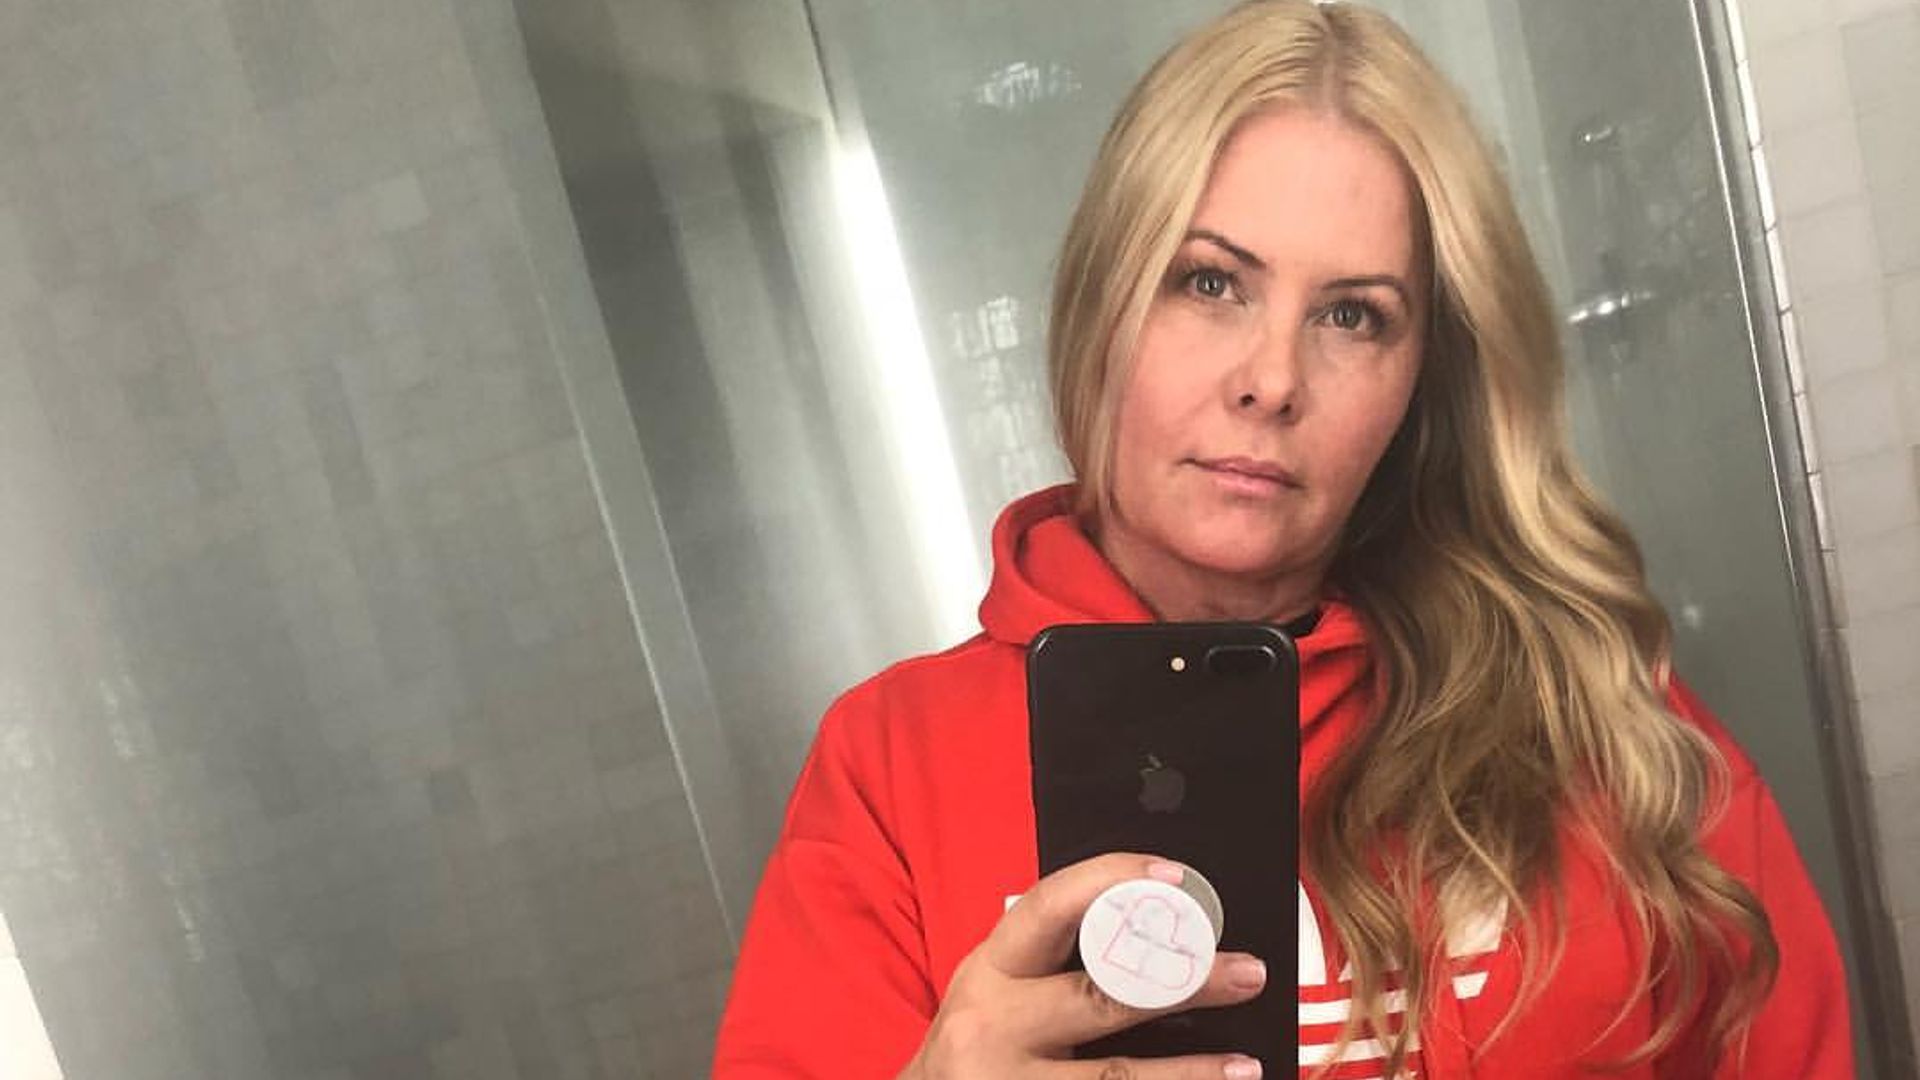 Nicole Eggert shares her breast cancer diagnosis